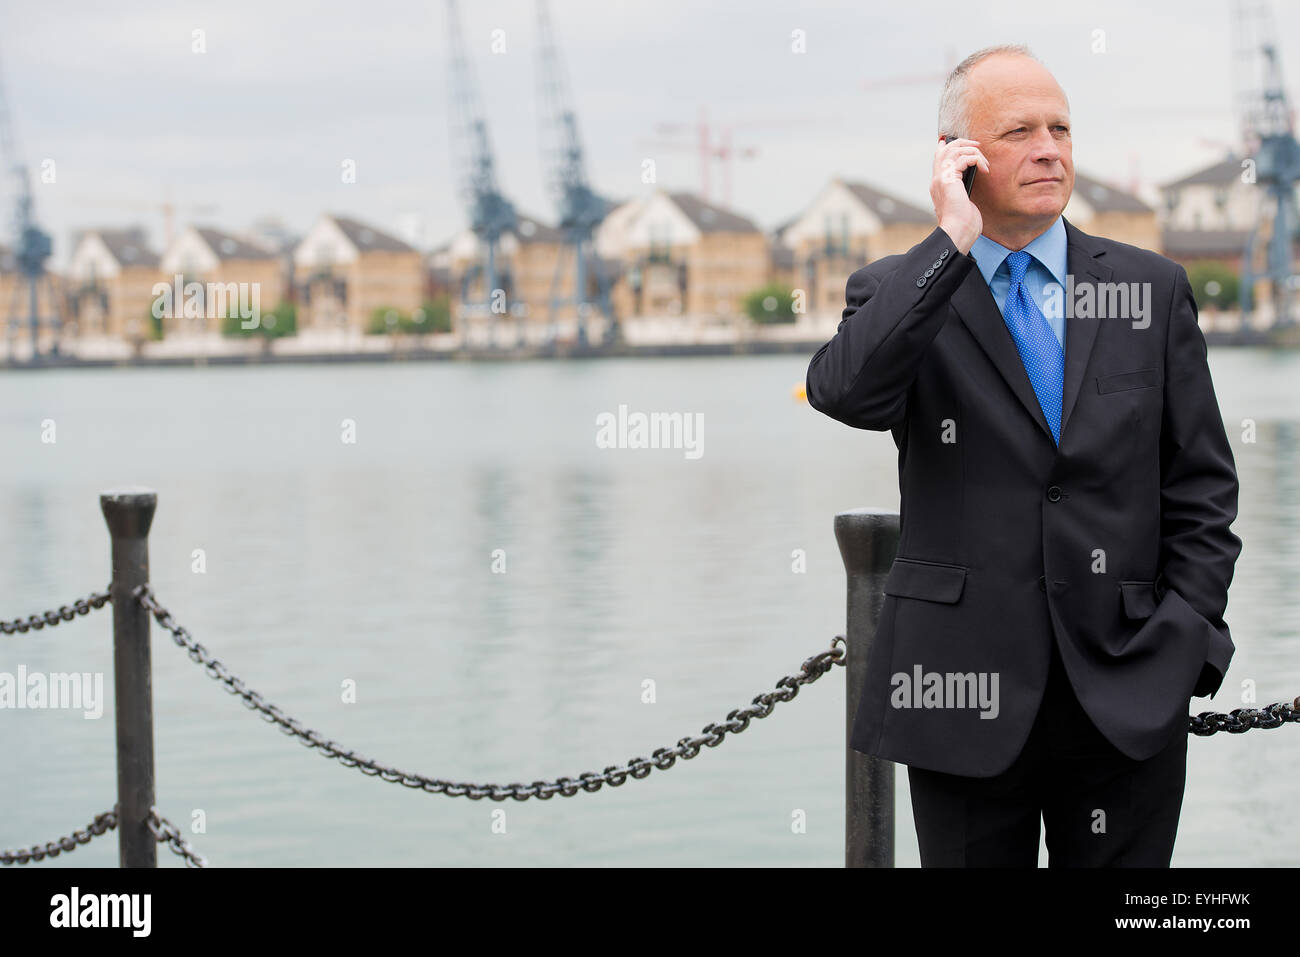 Businessman wearing a dark suit, talking on his mobile phone and situated at London's Docklands. Stock Photo